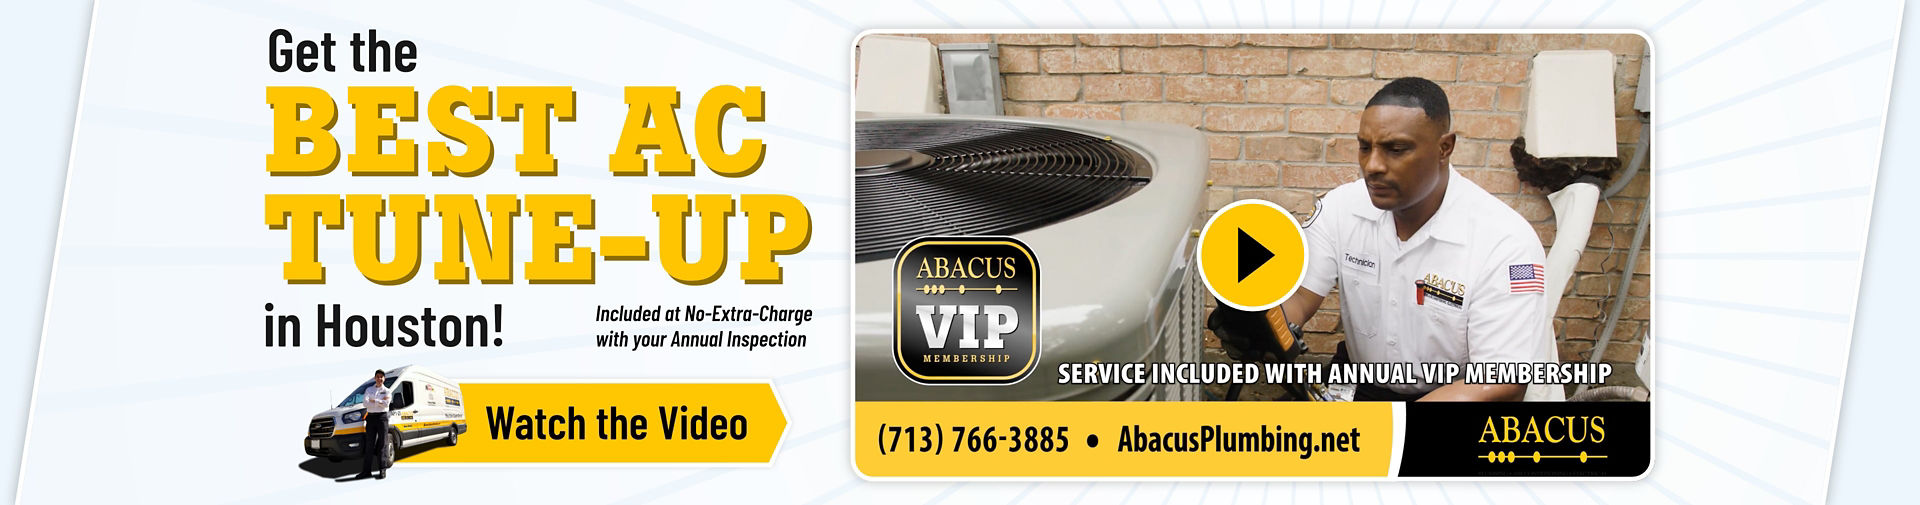 Get the Best AC Tune-up in Houston